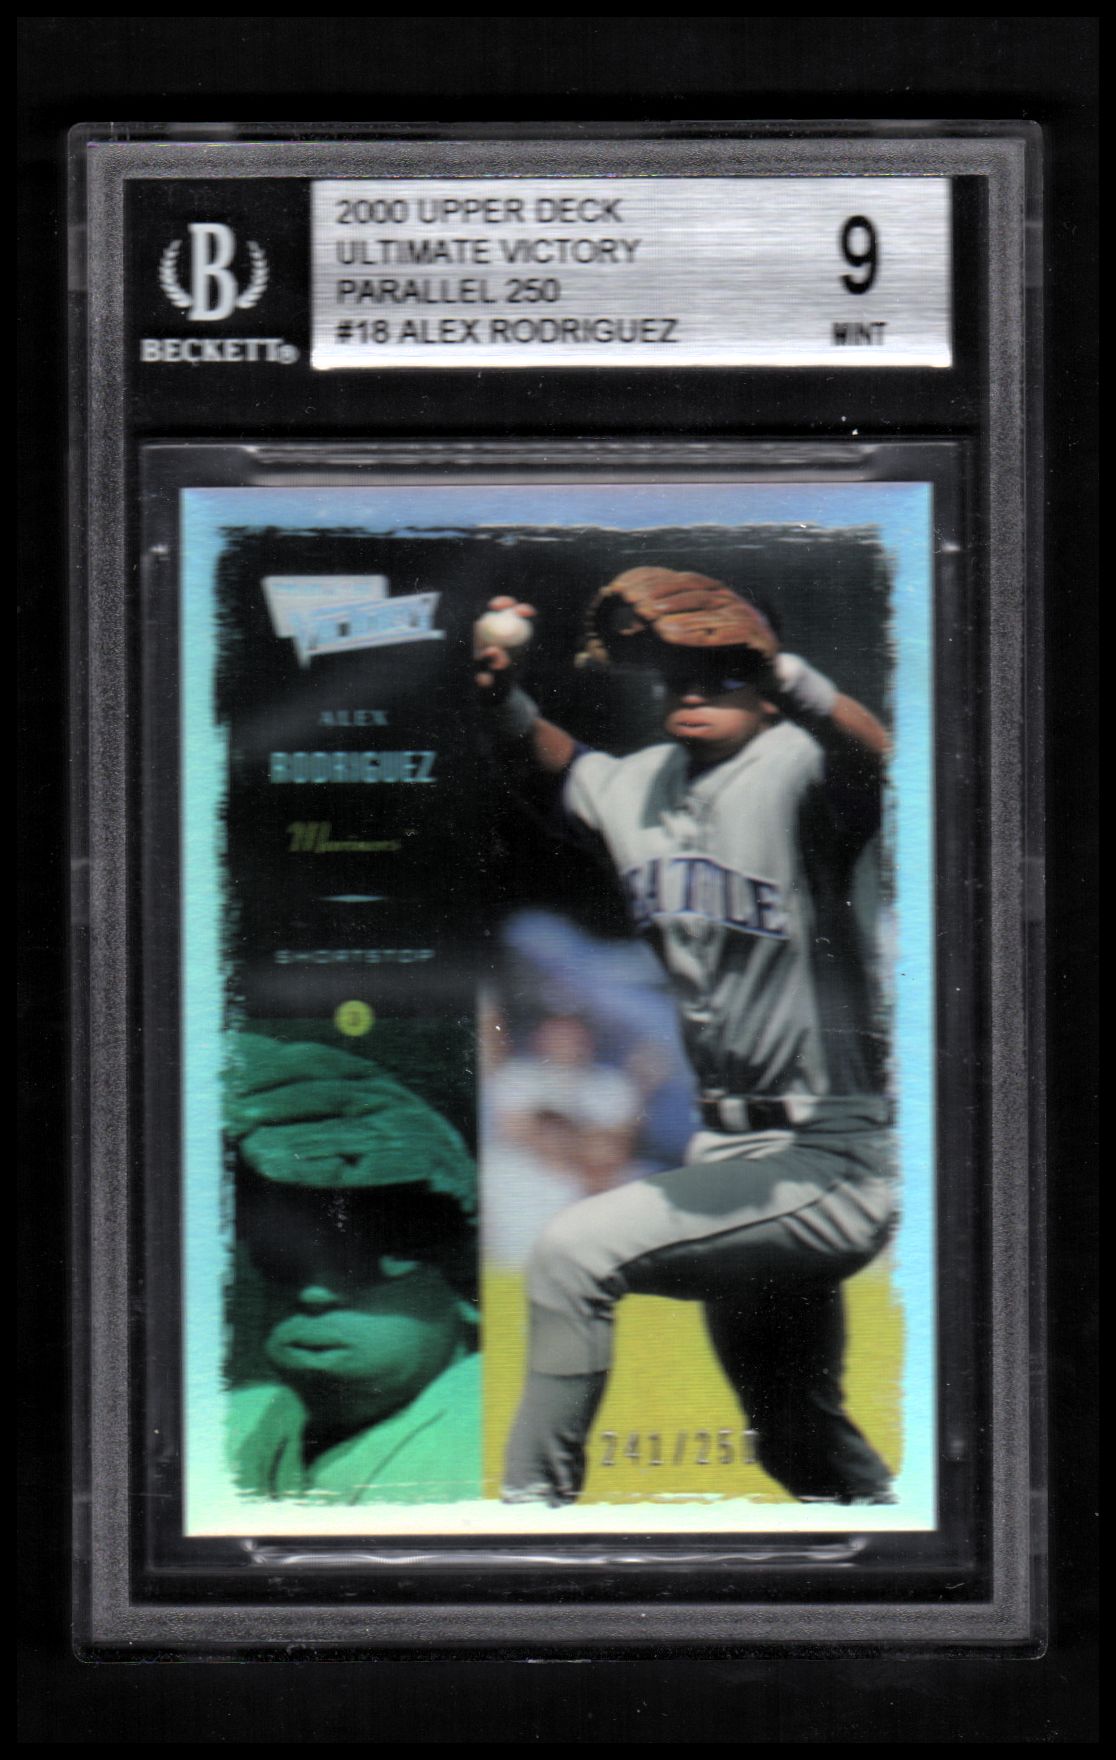 2000 Ultimate Victory Parallel 250 #18 Alex Rodriguez